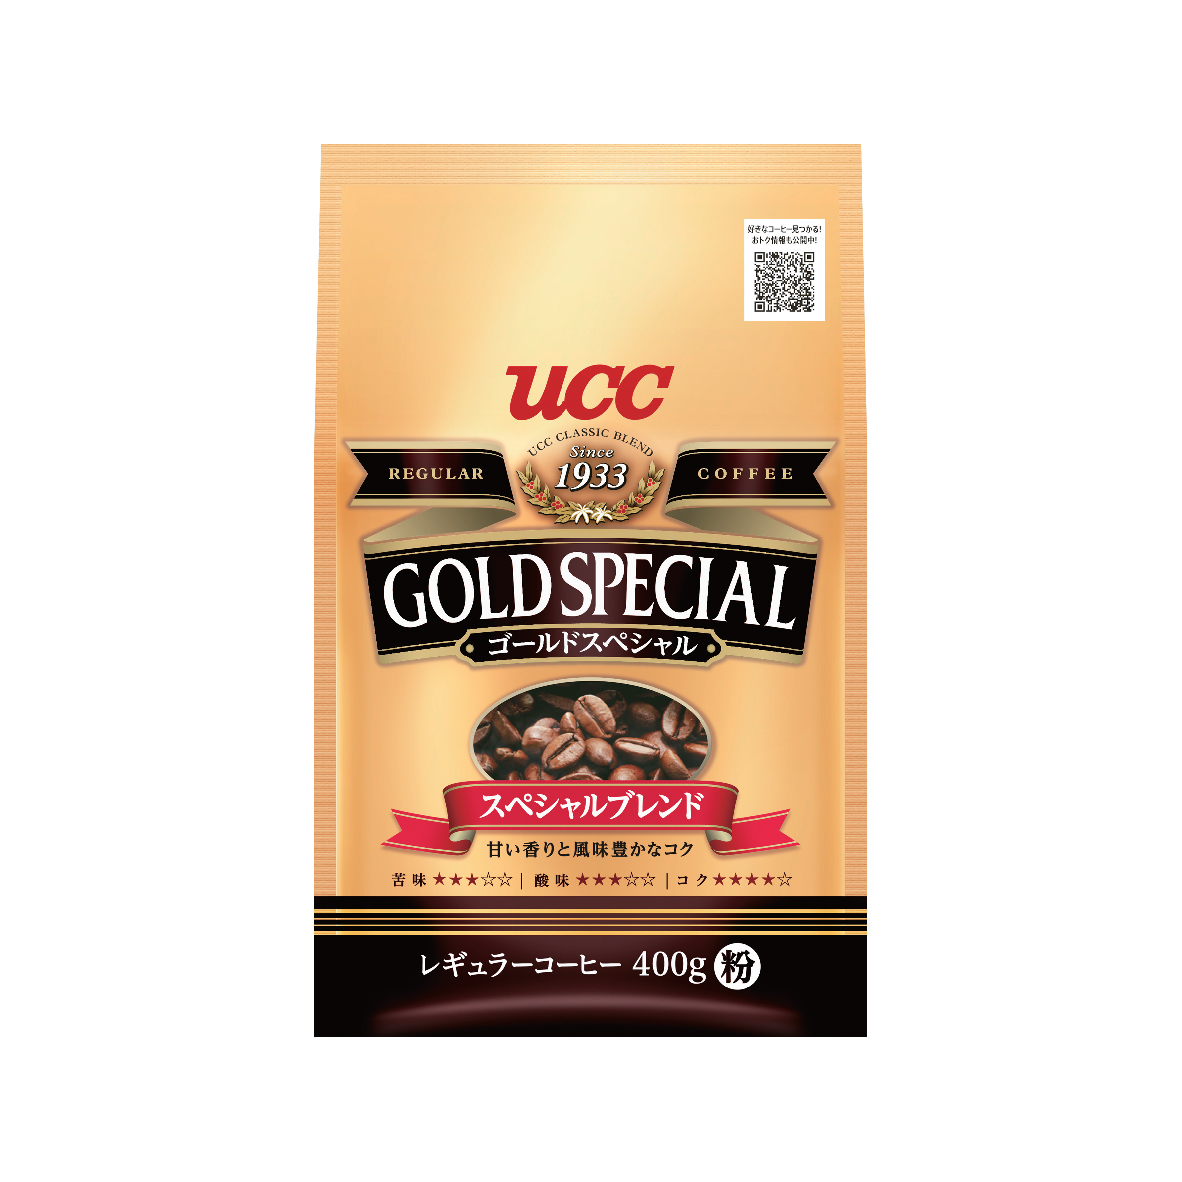 UCC Gold Special Special Blend Roasted Coffee